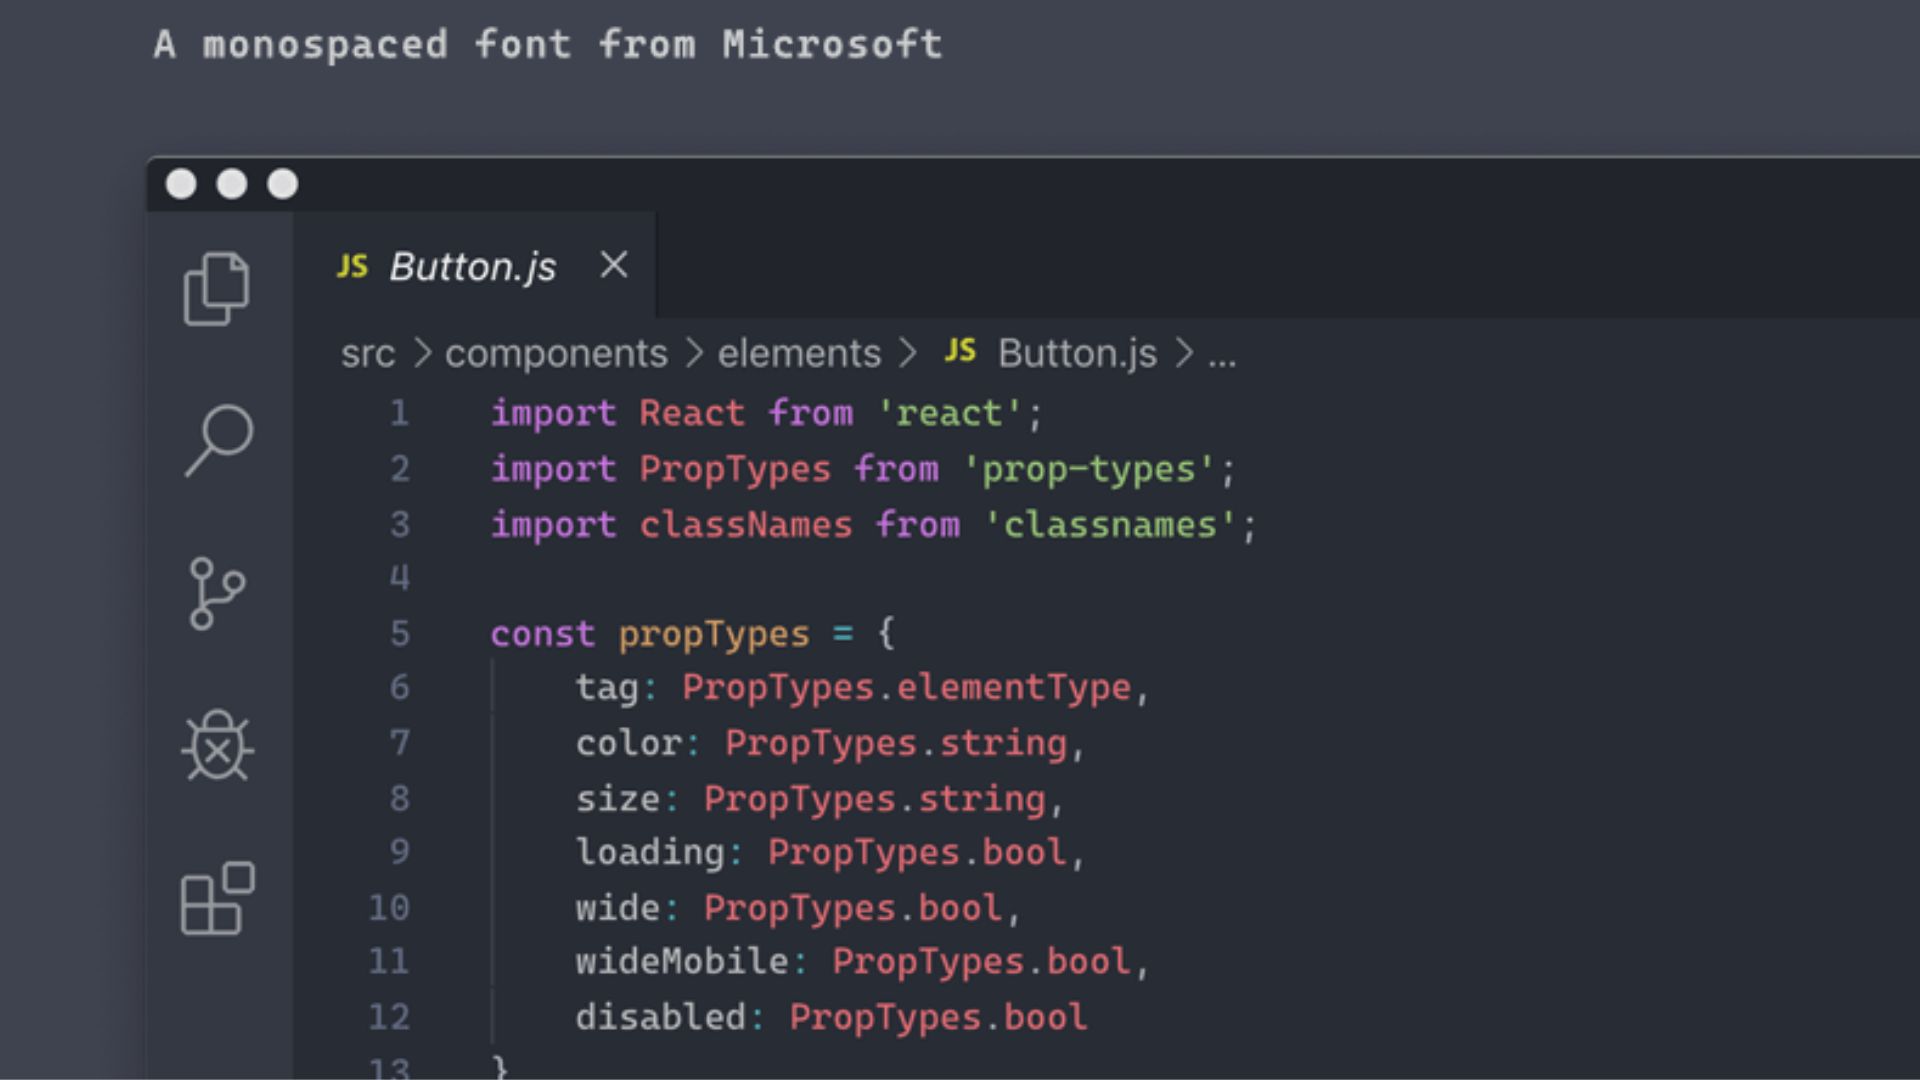 A monospaced font from Microsoft